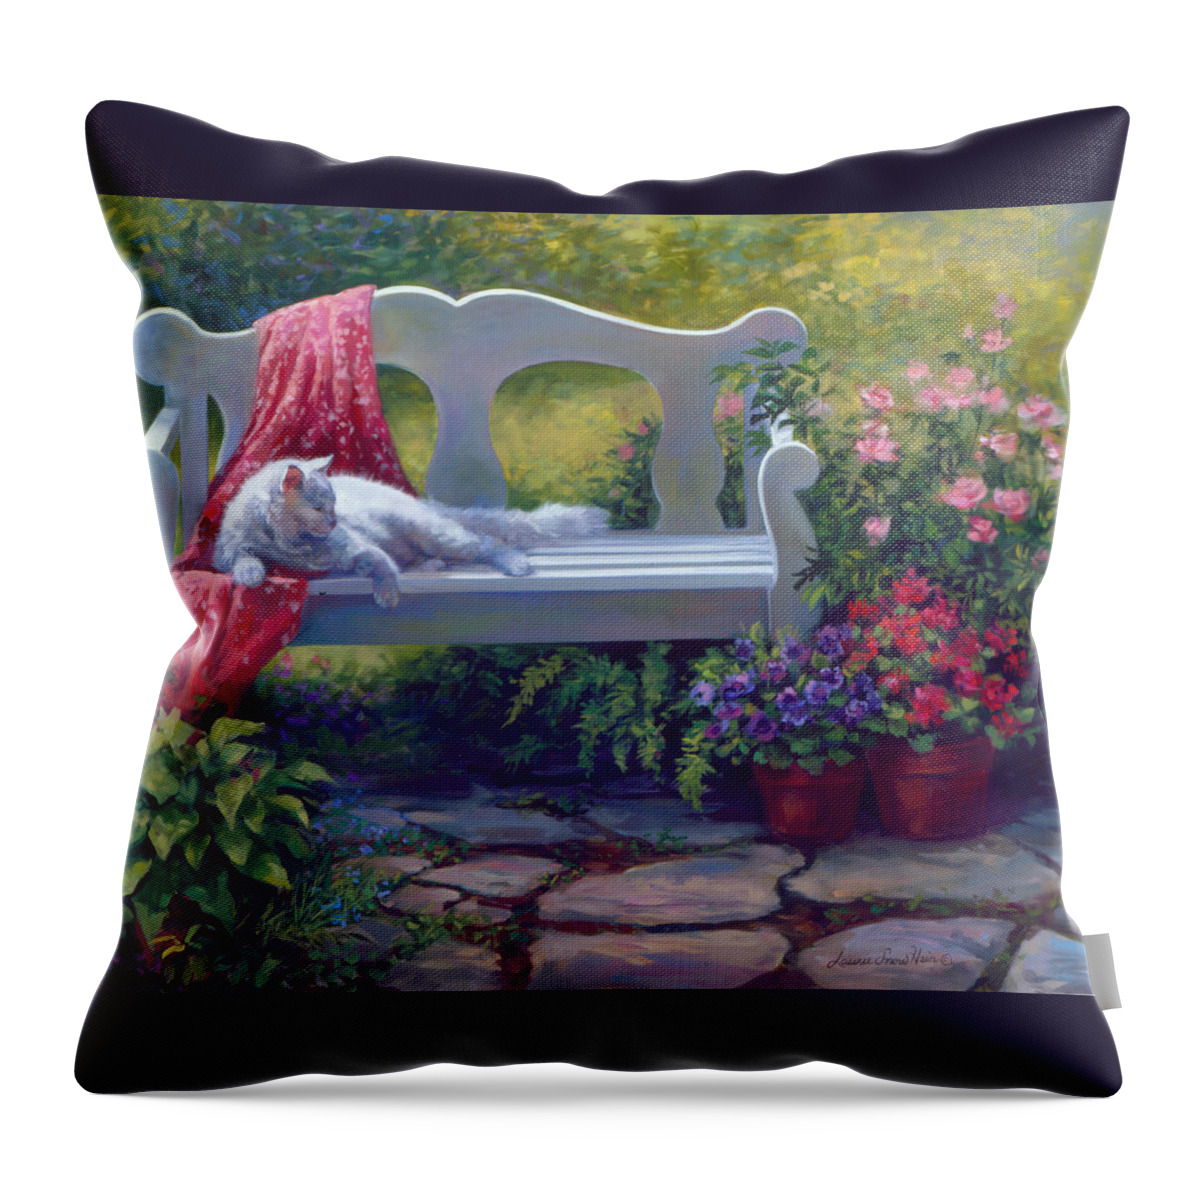 Landscape Throw Pillow featuring the painting Afternoon Delight by Laurie Snow Hein